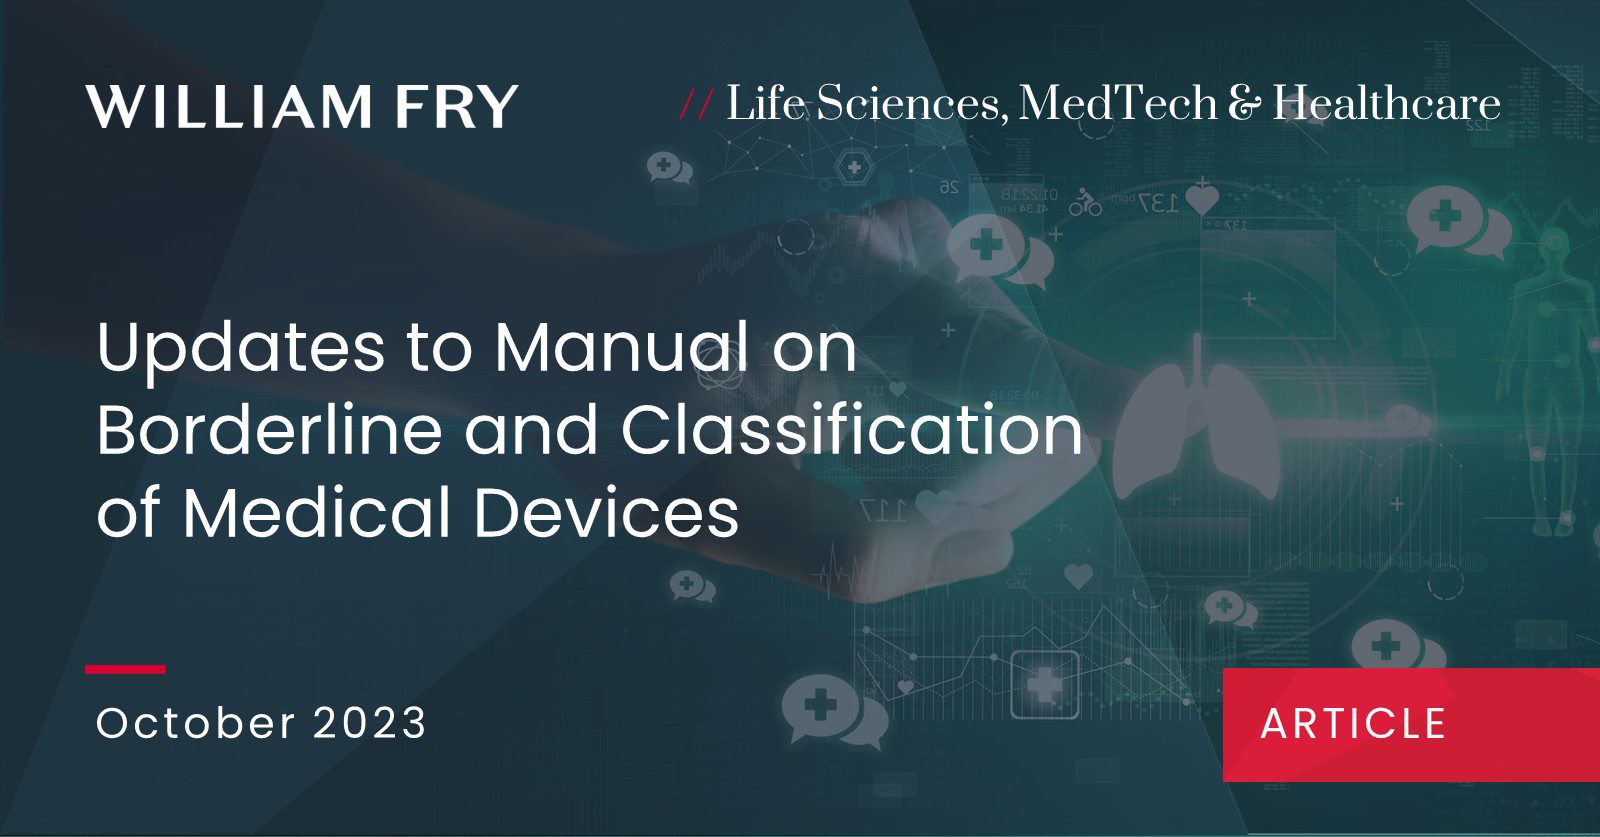 Updates to Manual on Borderline and Classification of Medical Devices